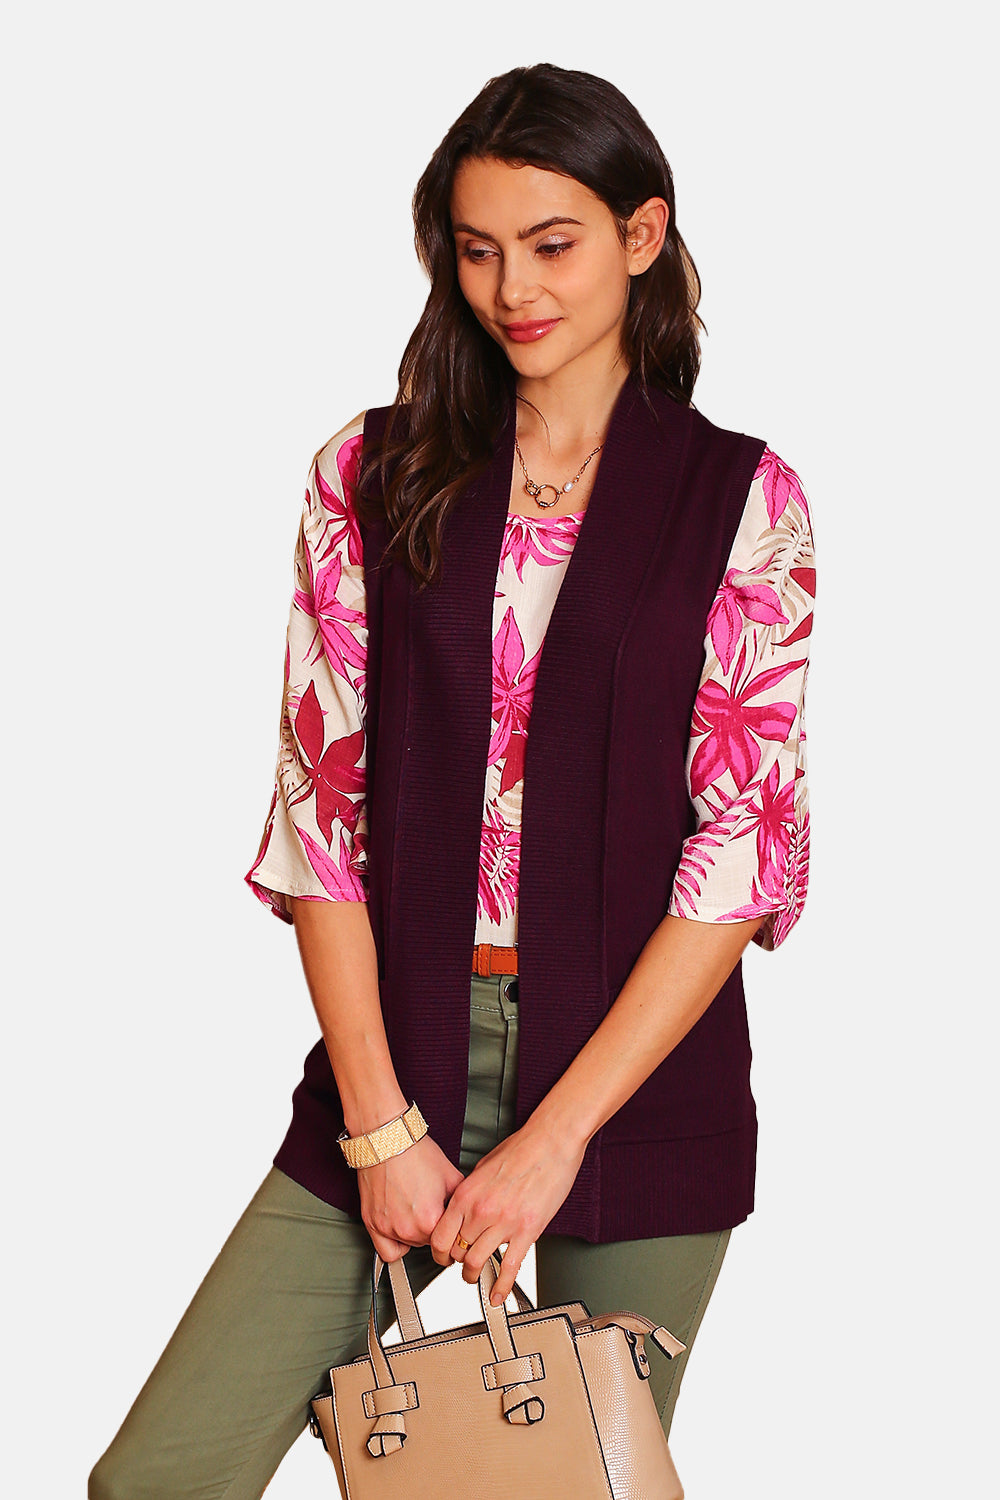 Long shawl collar cardigan with front pockets without sleeves